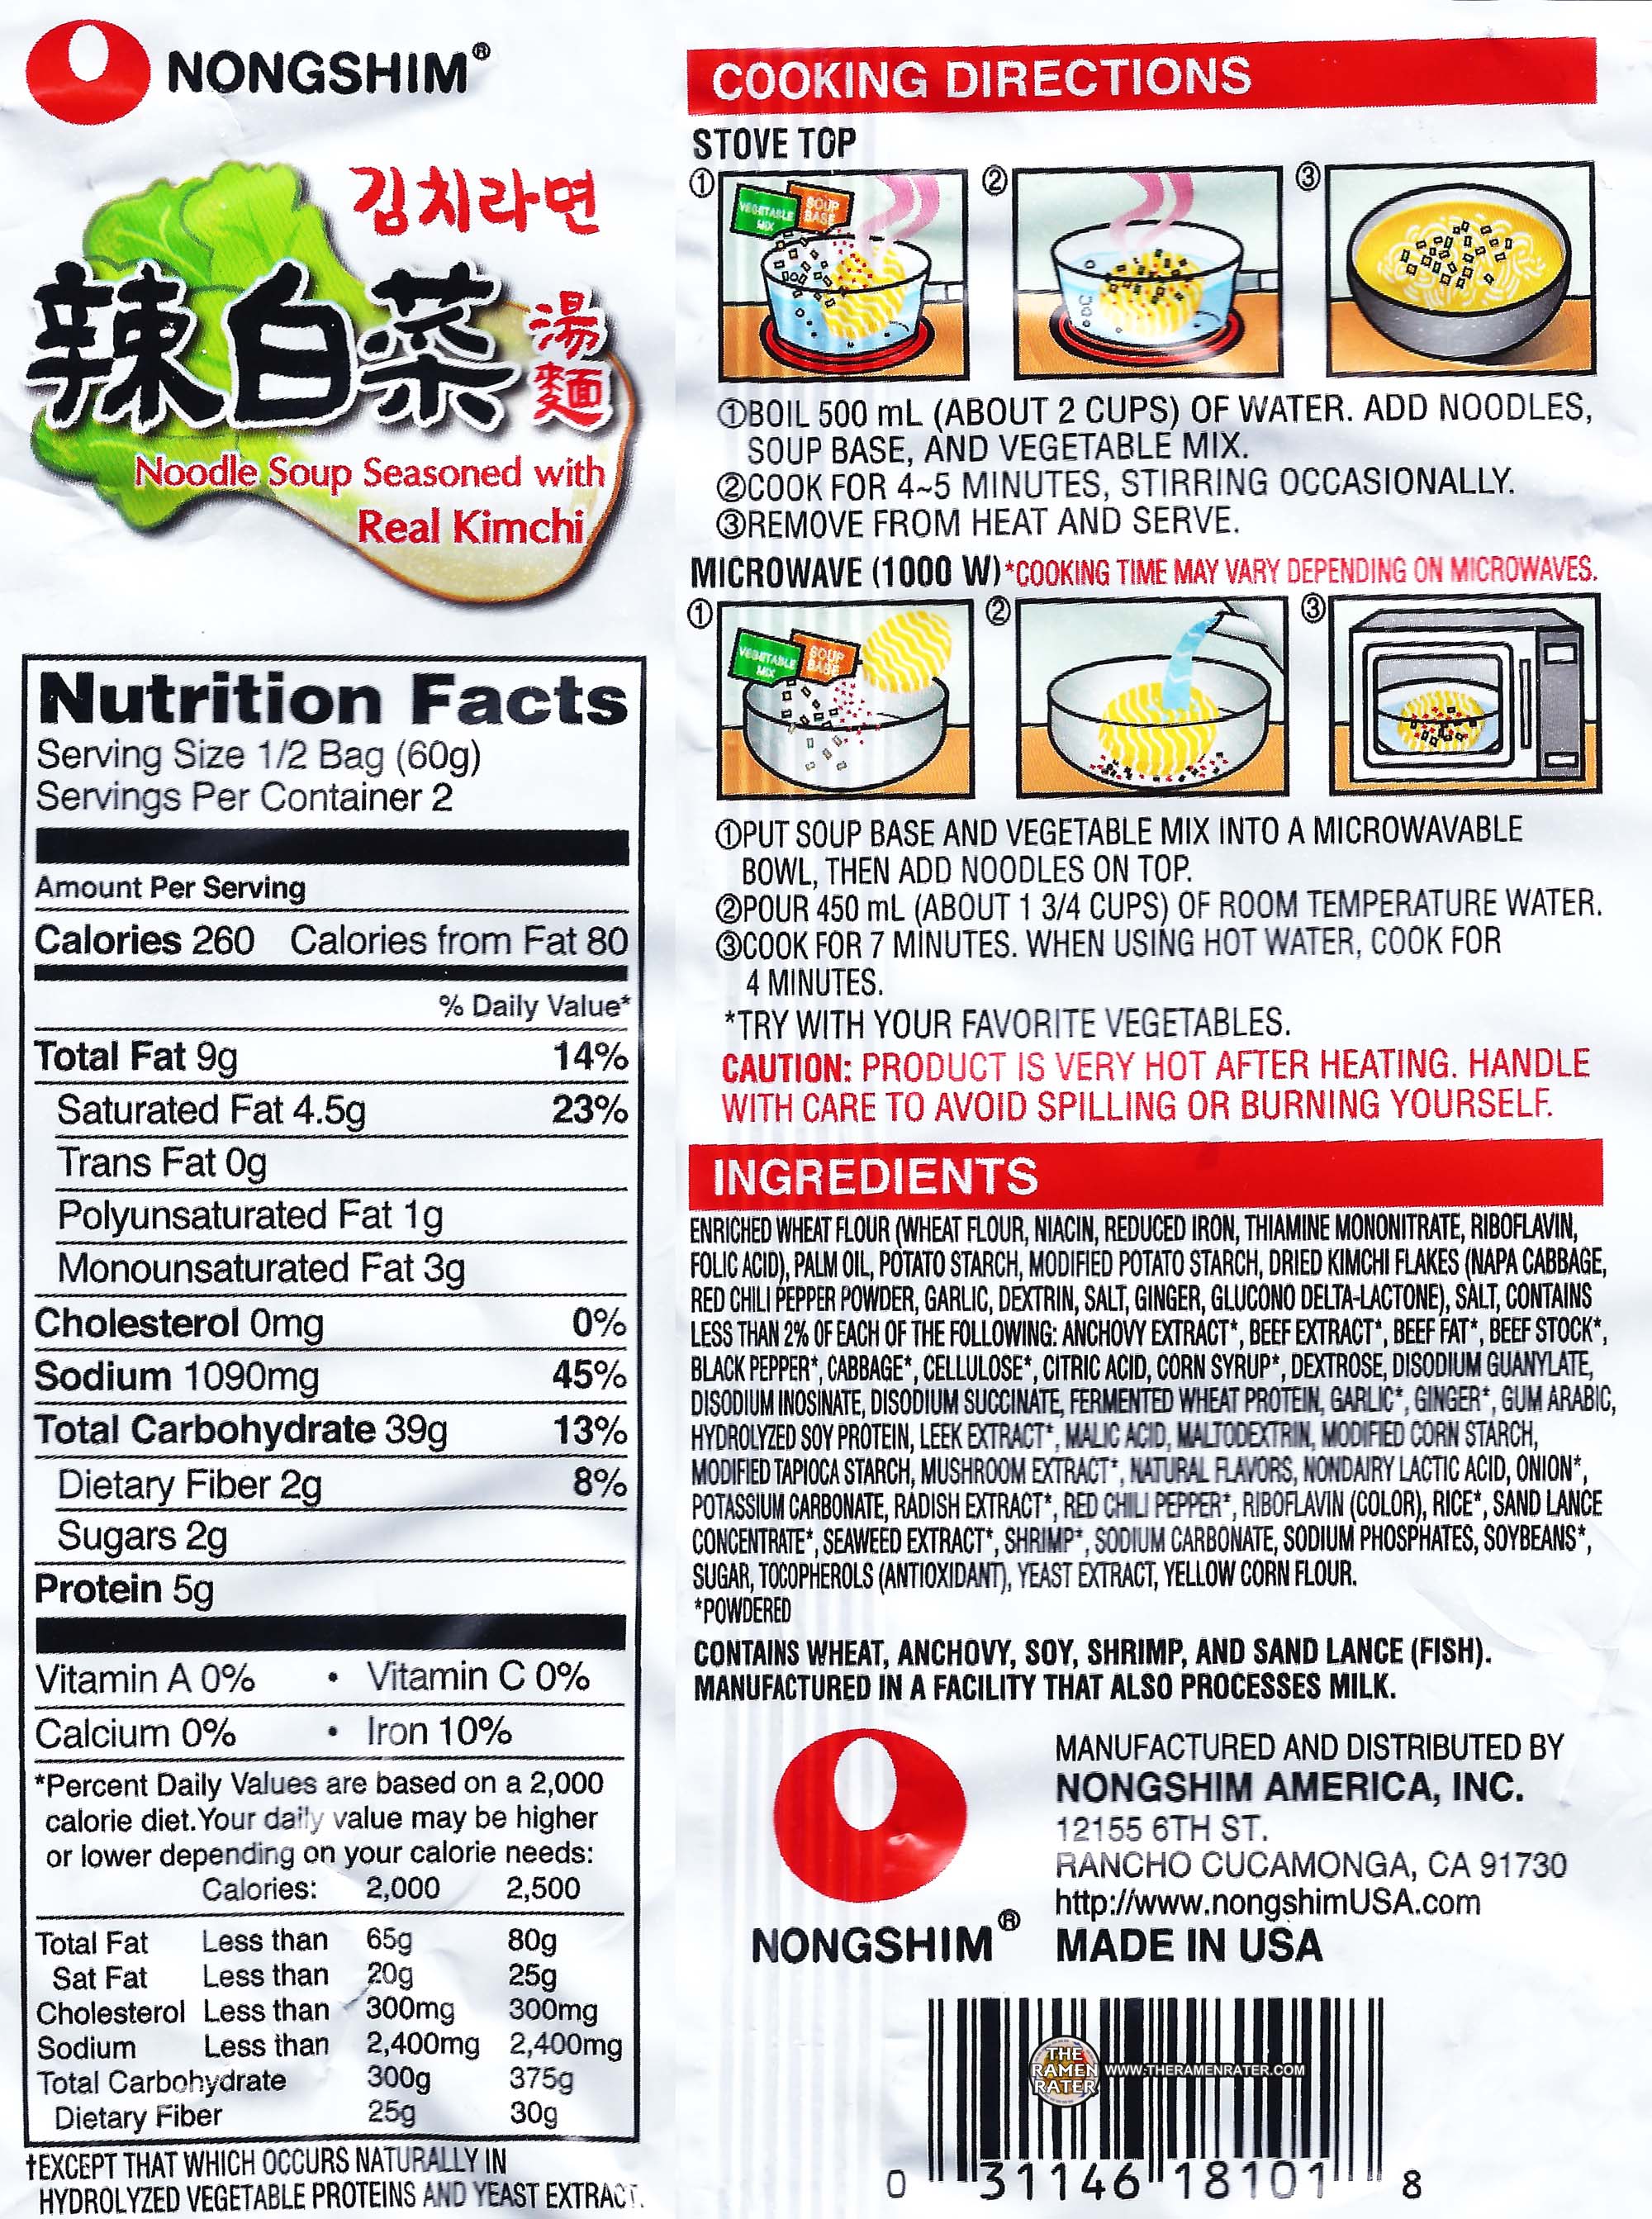 #1969: Nongshim Noodle Soup Seasoned With Real Kimchi - The Ramen Rater